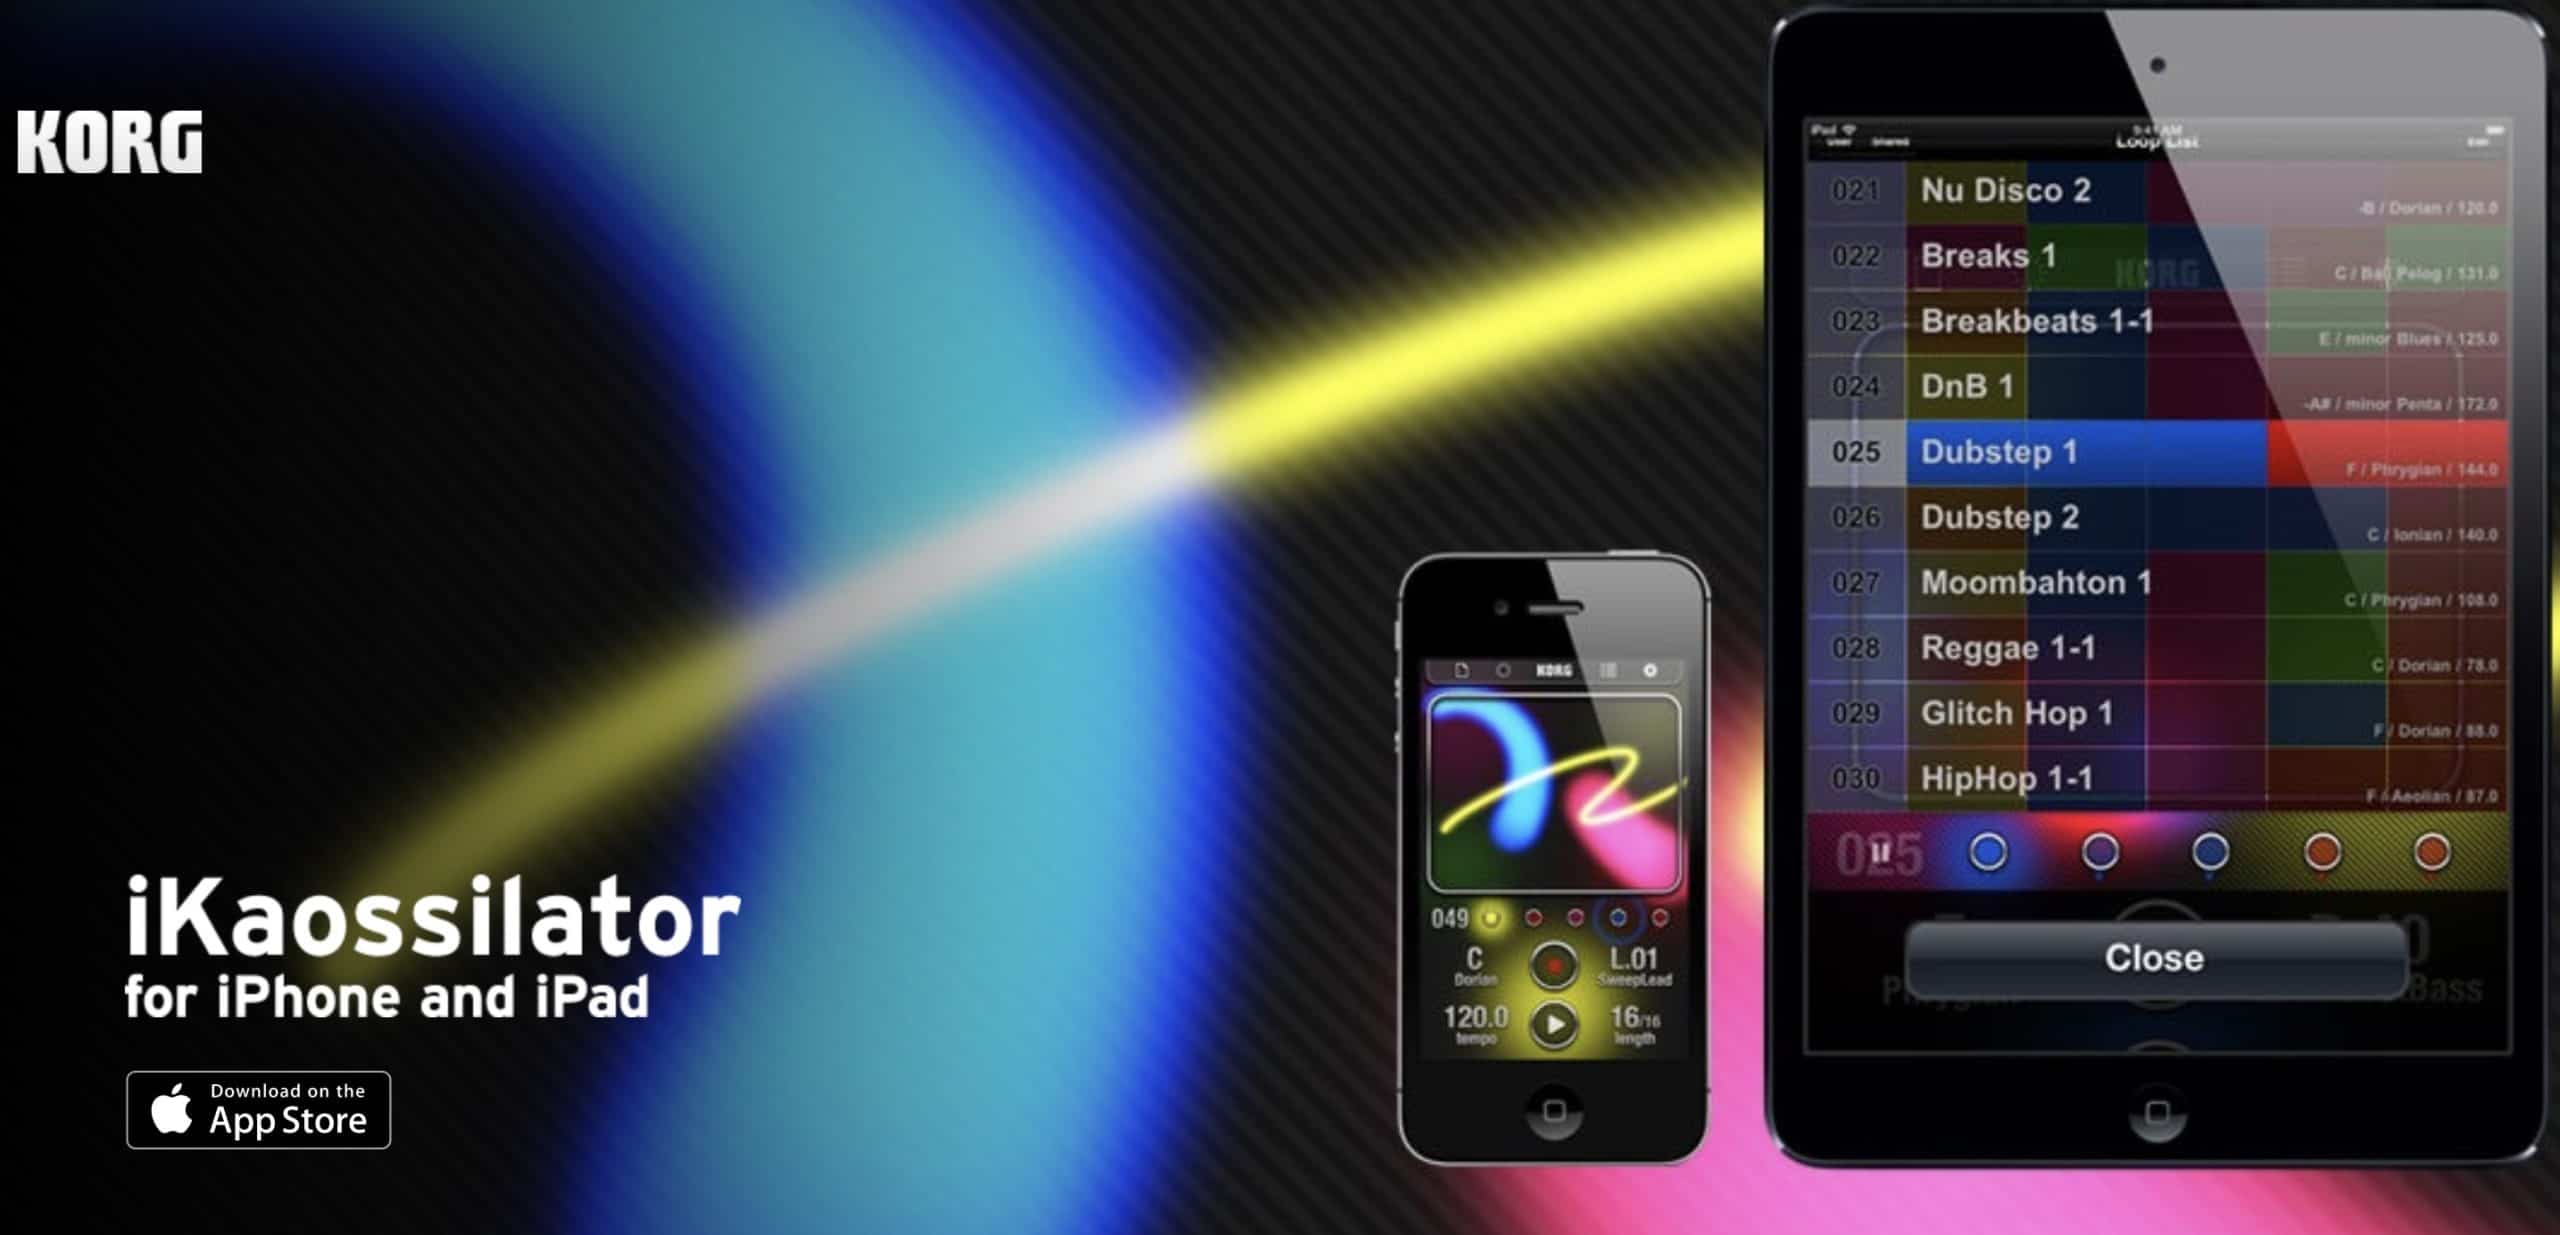 Kaossilator App for iOS and Android Free For A Limited Time